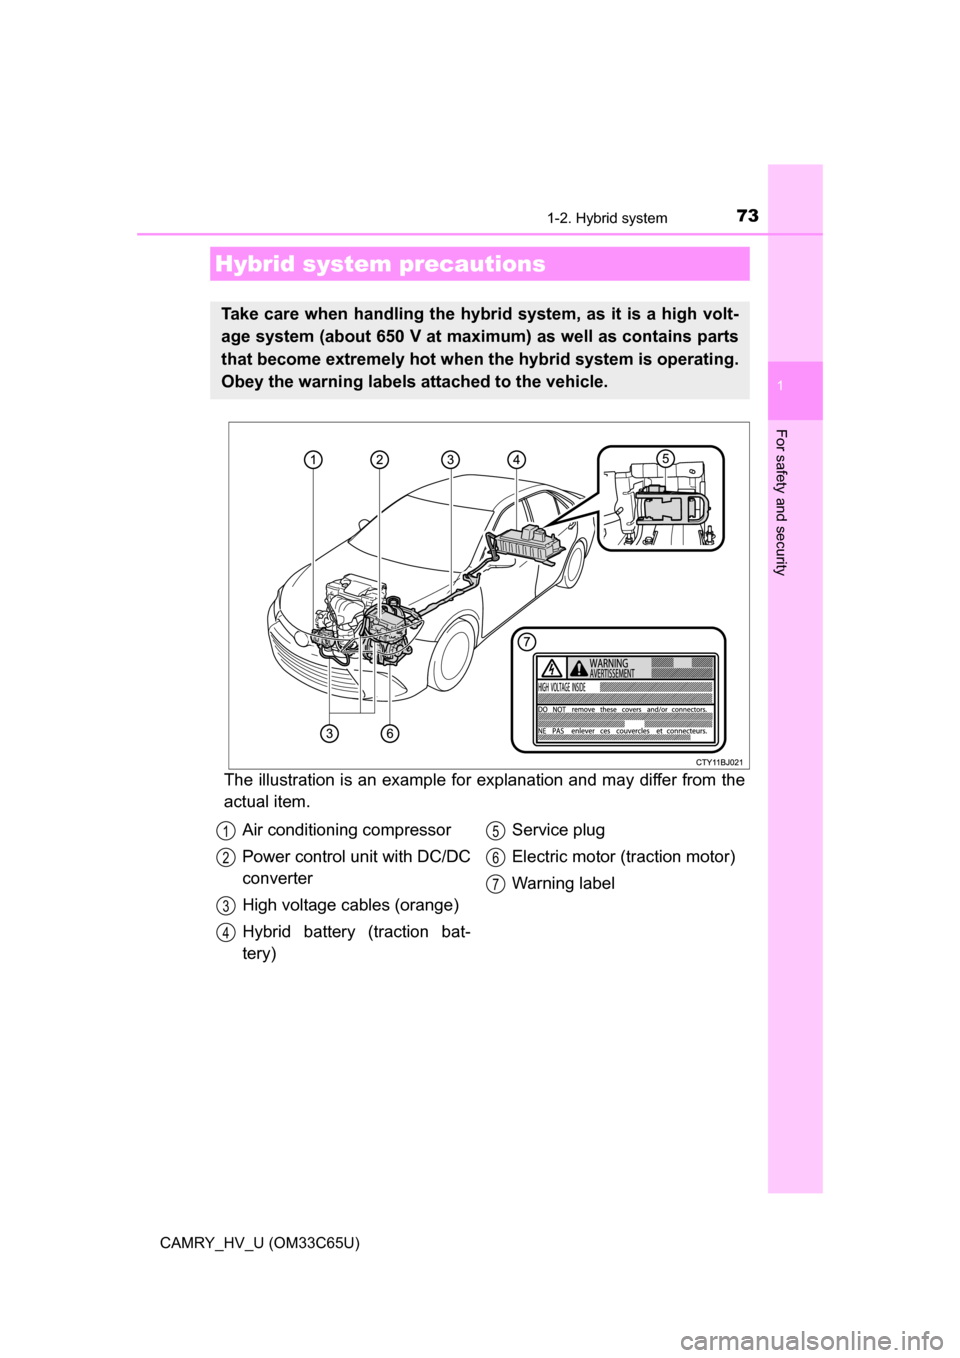 TOYOTA CAMRY HYBRID 2017 XV50 / 9.G Owners Manual 731-2. Hybrid system
1
For safety and security
CAMRY_HV_U (OM33C65U)
The illustration is an example for explanation and may differ from the
actual item.
Hybrid system precautions
Take care when handli